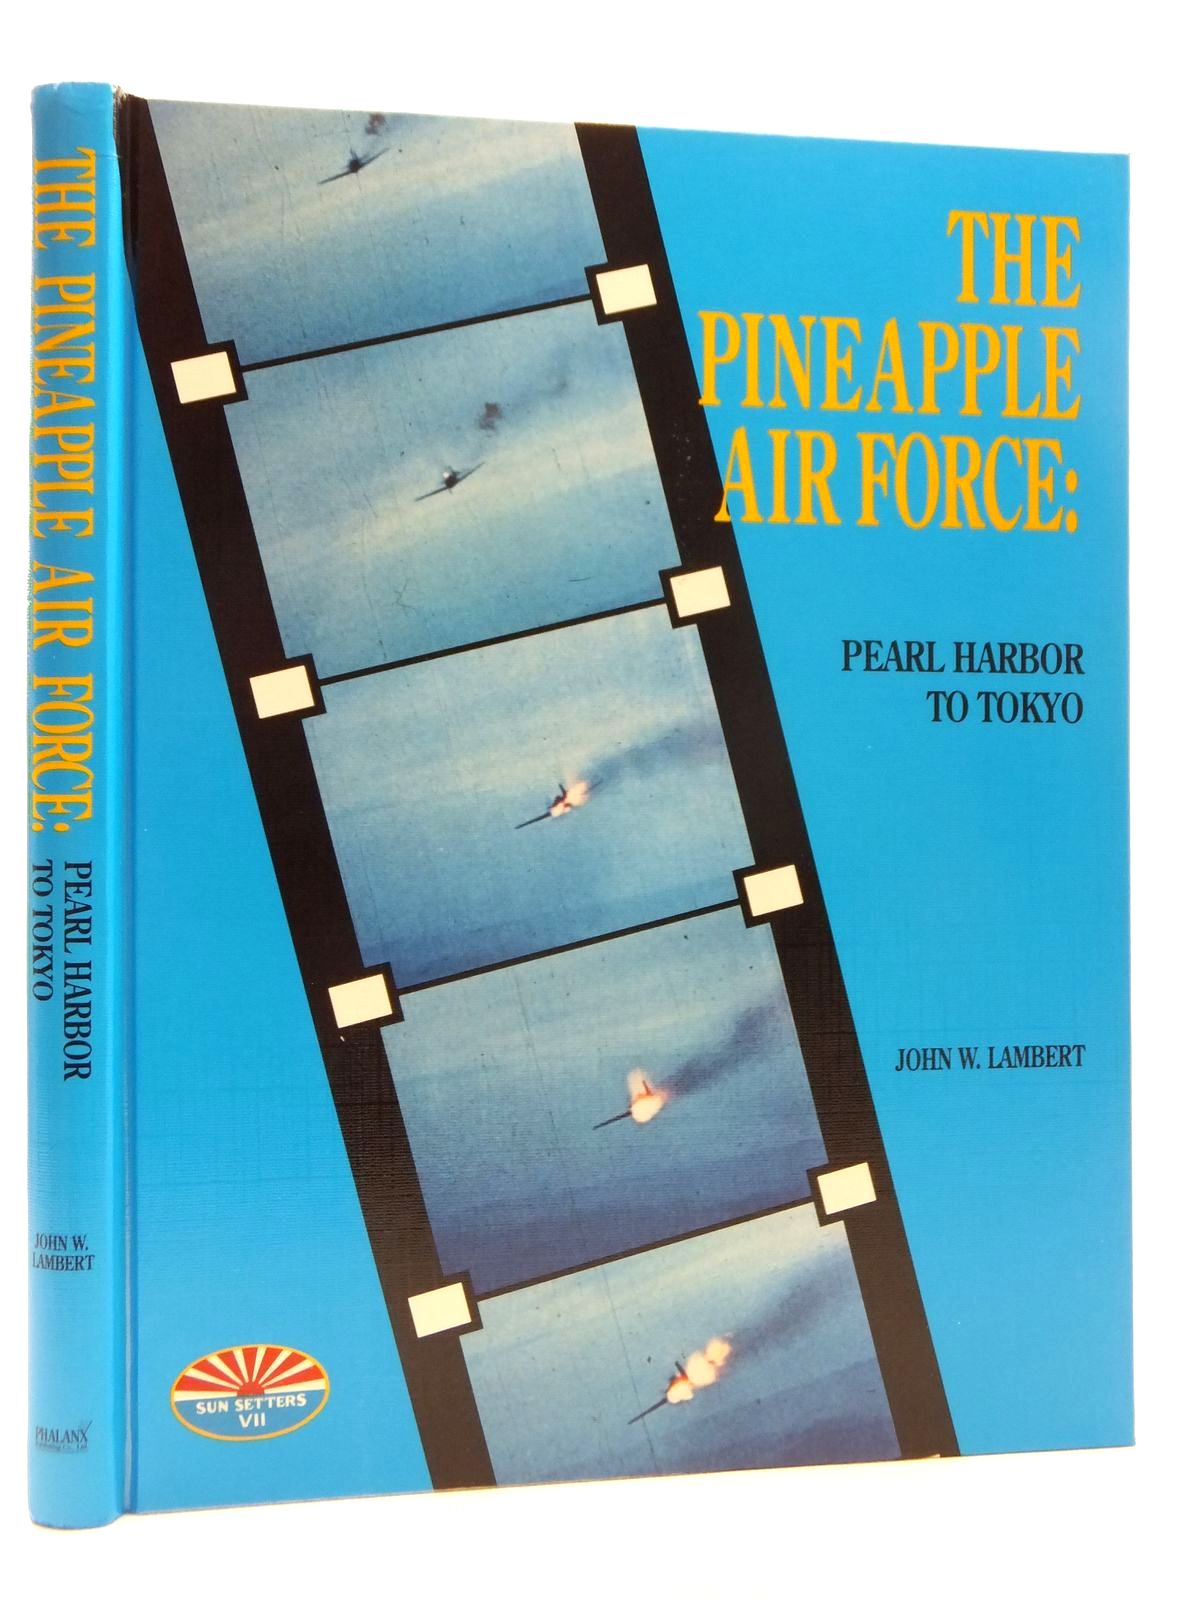 Photo of THE PINEAPPLE AIR FORCE: PEARL HARBOR TO TOKYO written by Lambert, John W. published by Phalanx Publishing Co. Ltd. (STOCK CODE: 1814928)  for sale by Stella & Rose's Books